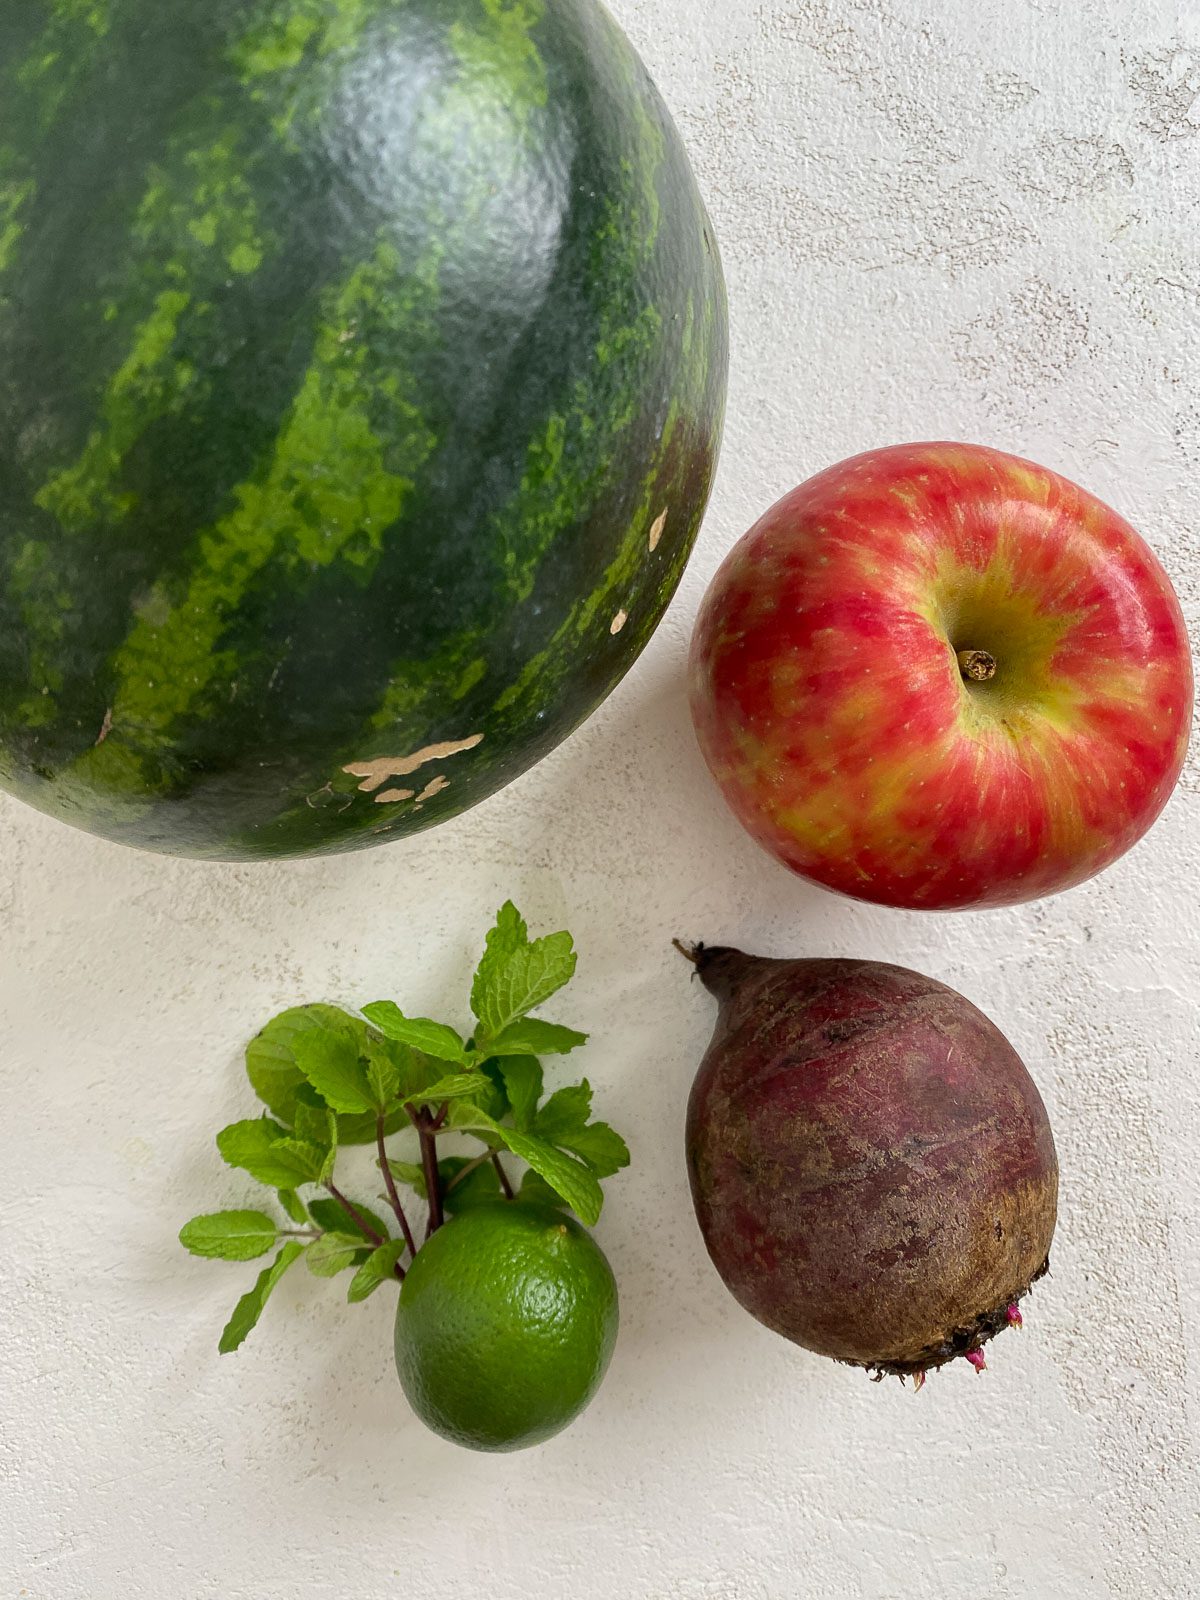 ingredients for Fresh Watermelon Juice Blend against a light background